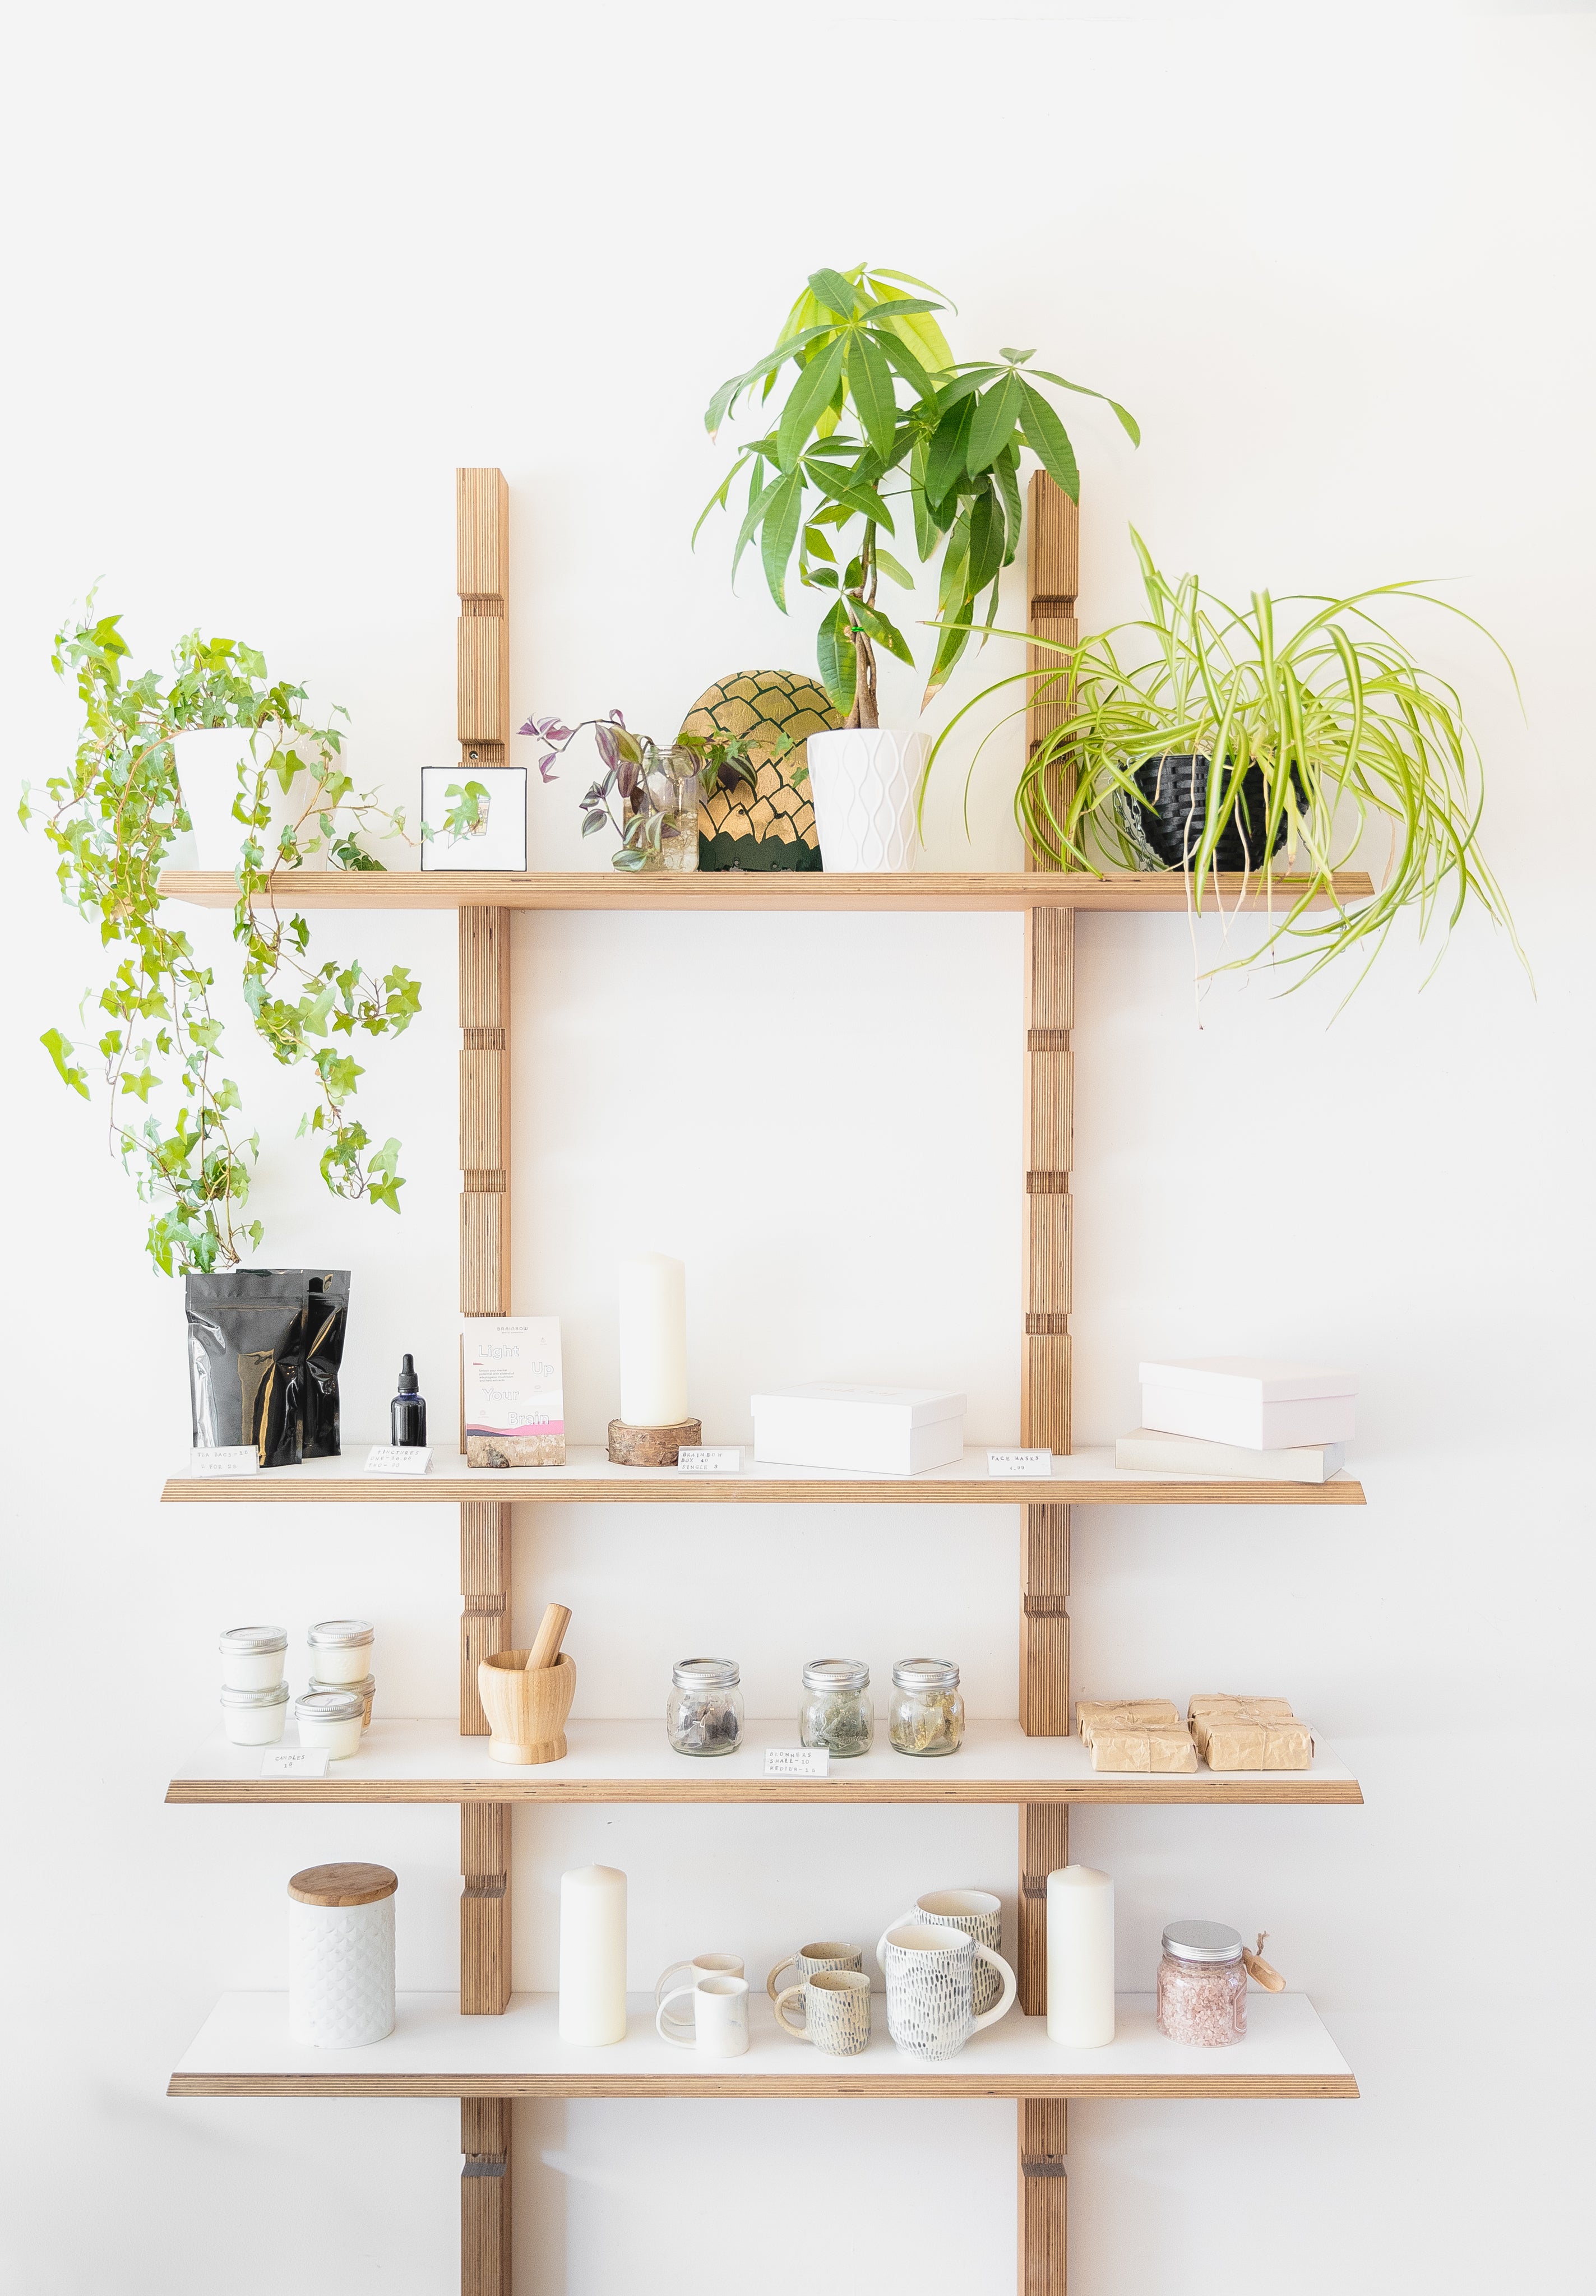 a-selection-of-candles-and-plants-on-wooden-shelves.jpg